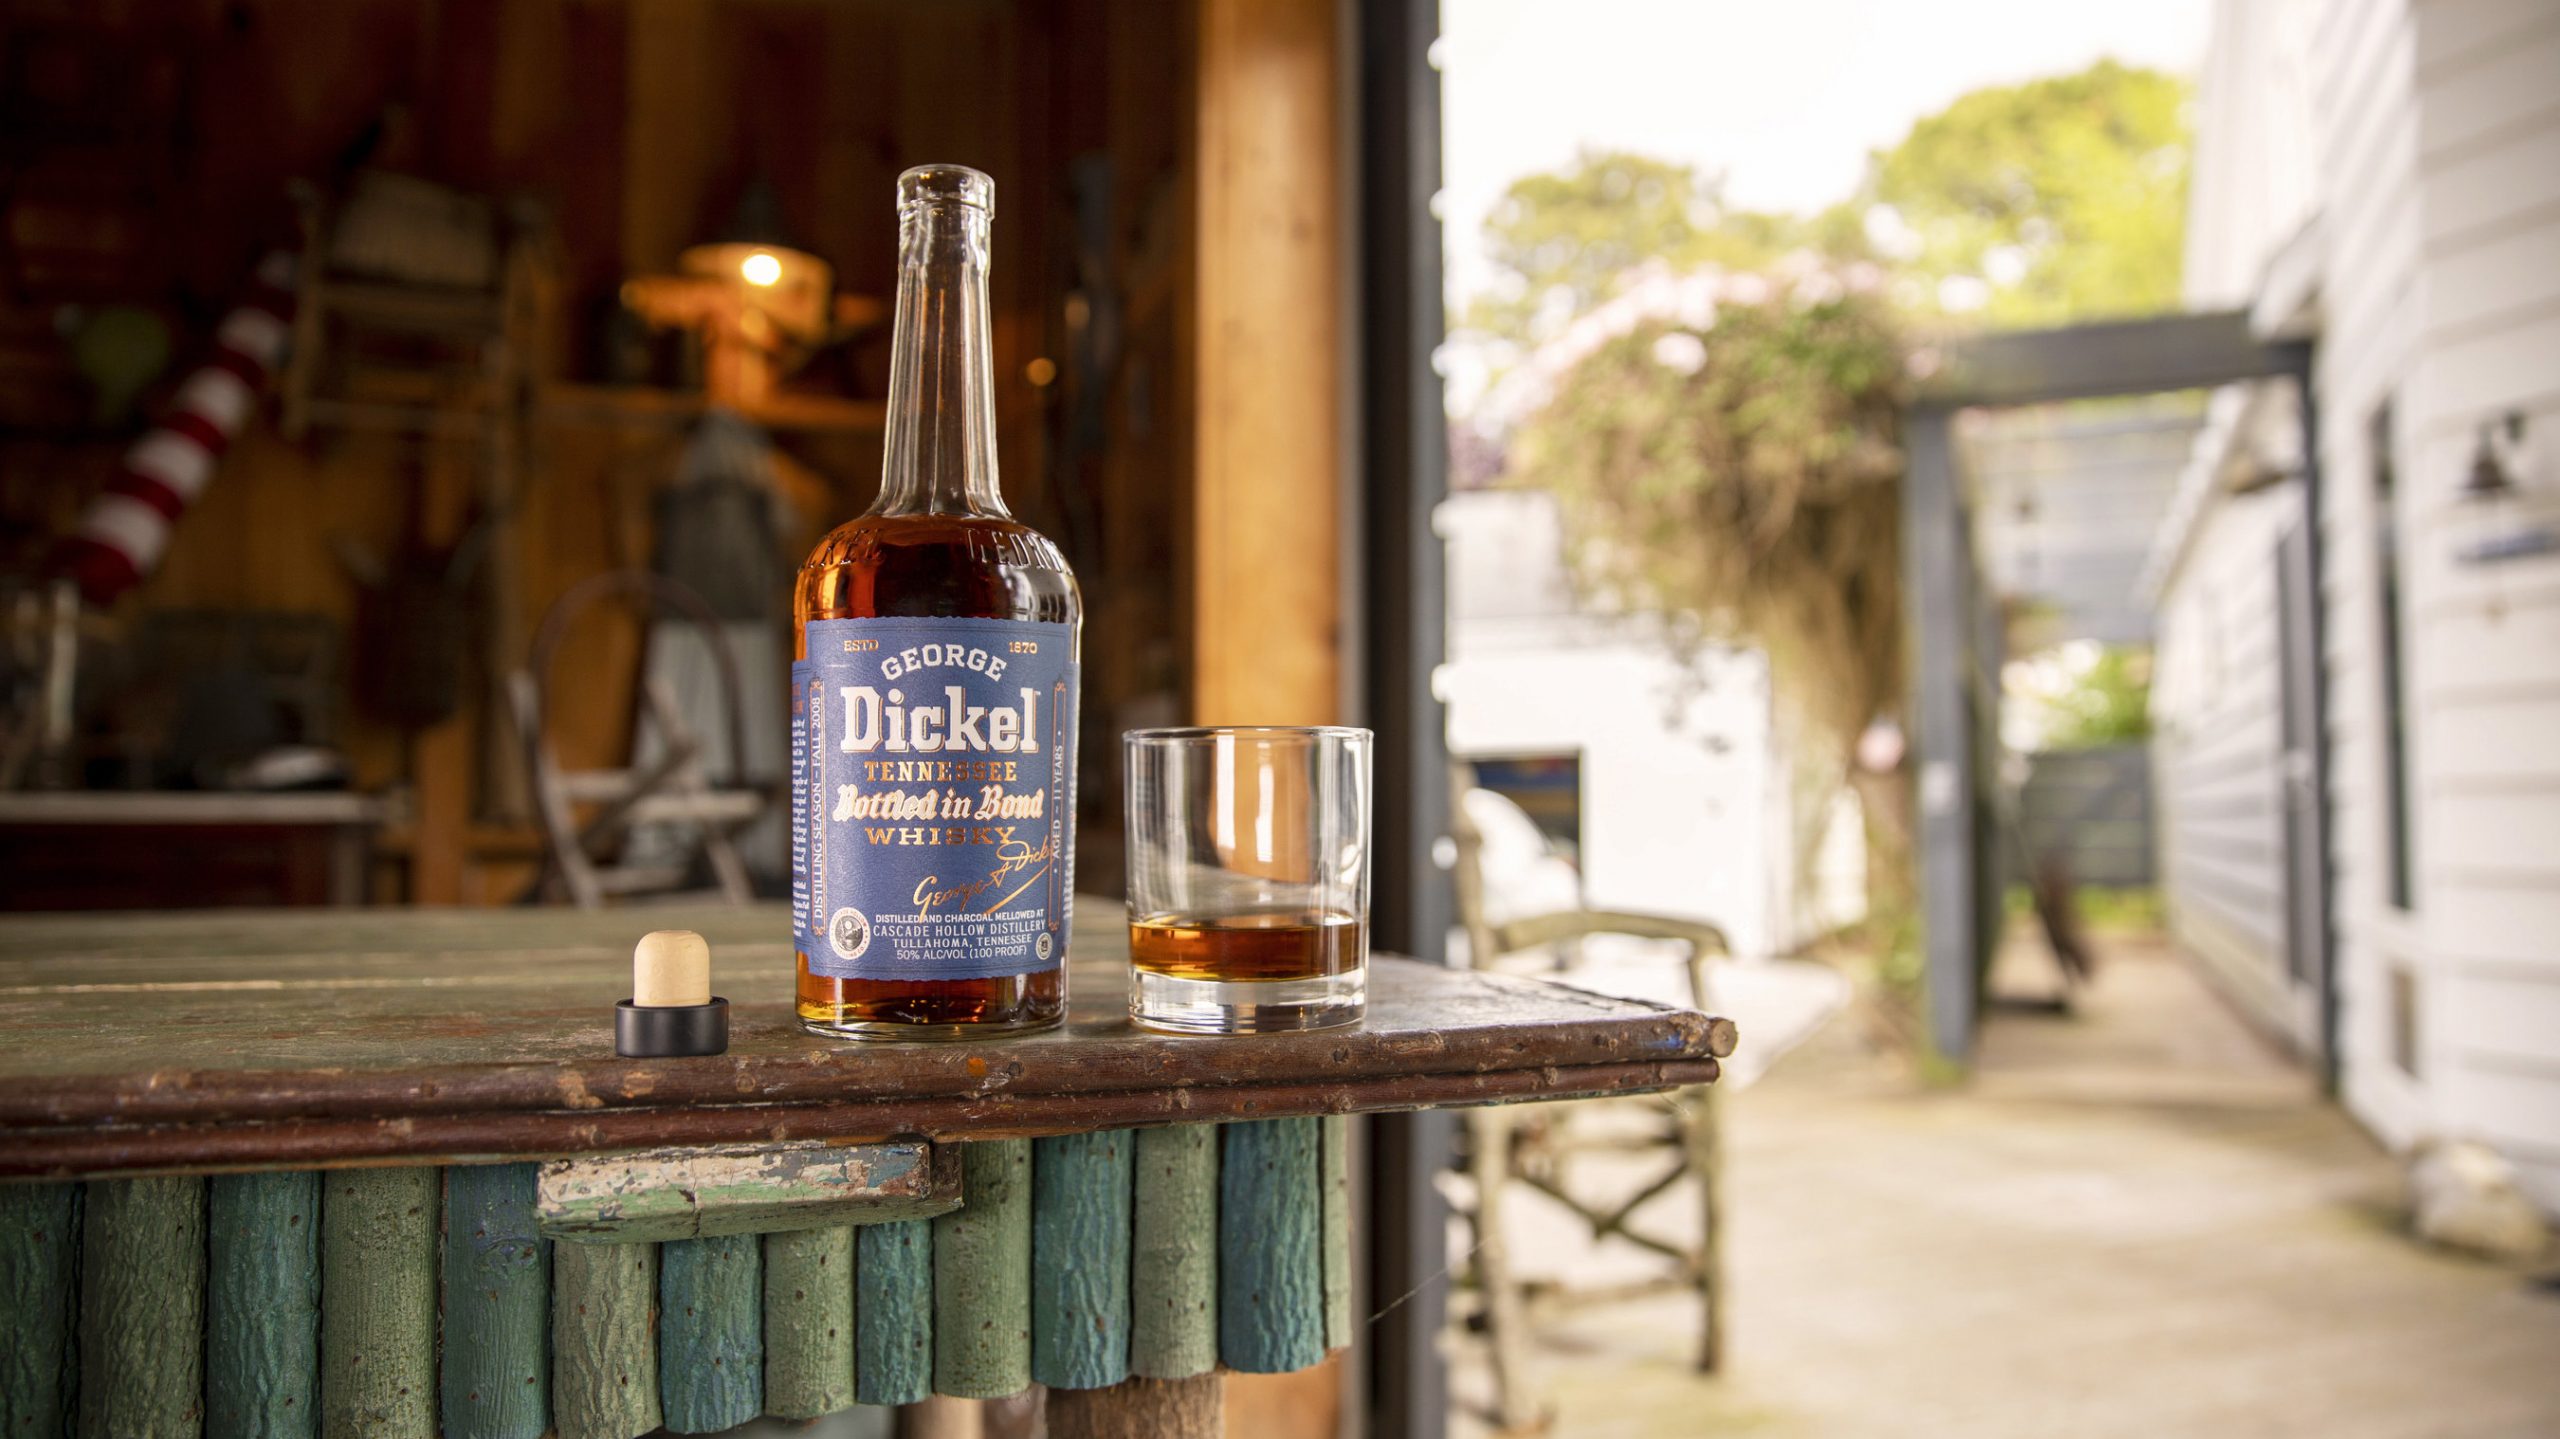 George Dickel Announces the Release of Bottled in Bond (Fall 2008)